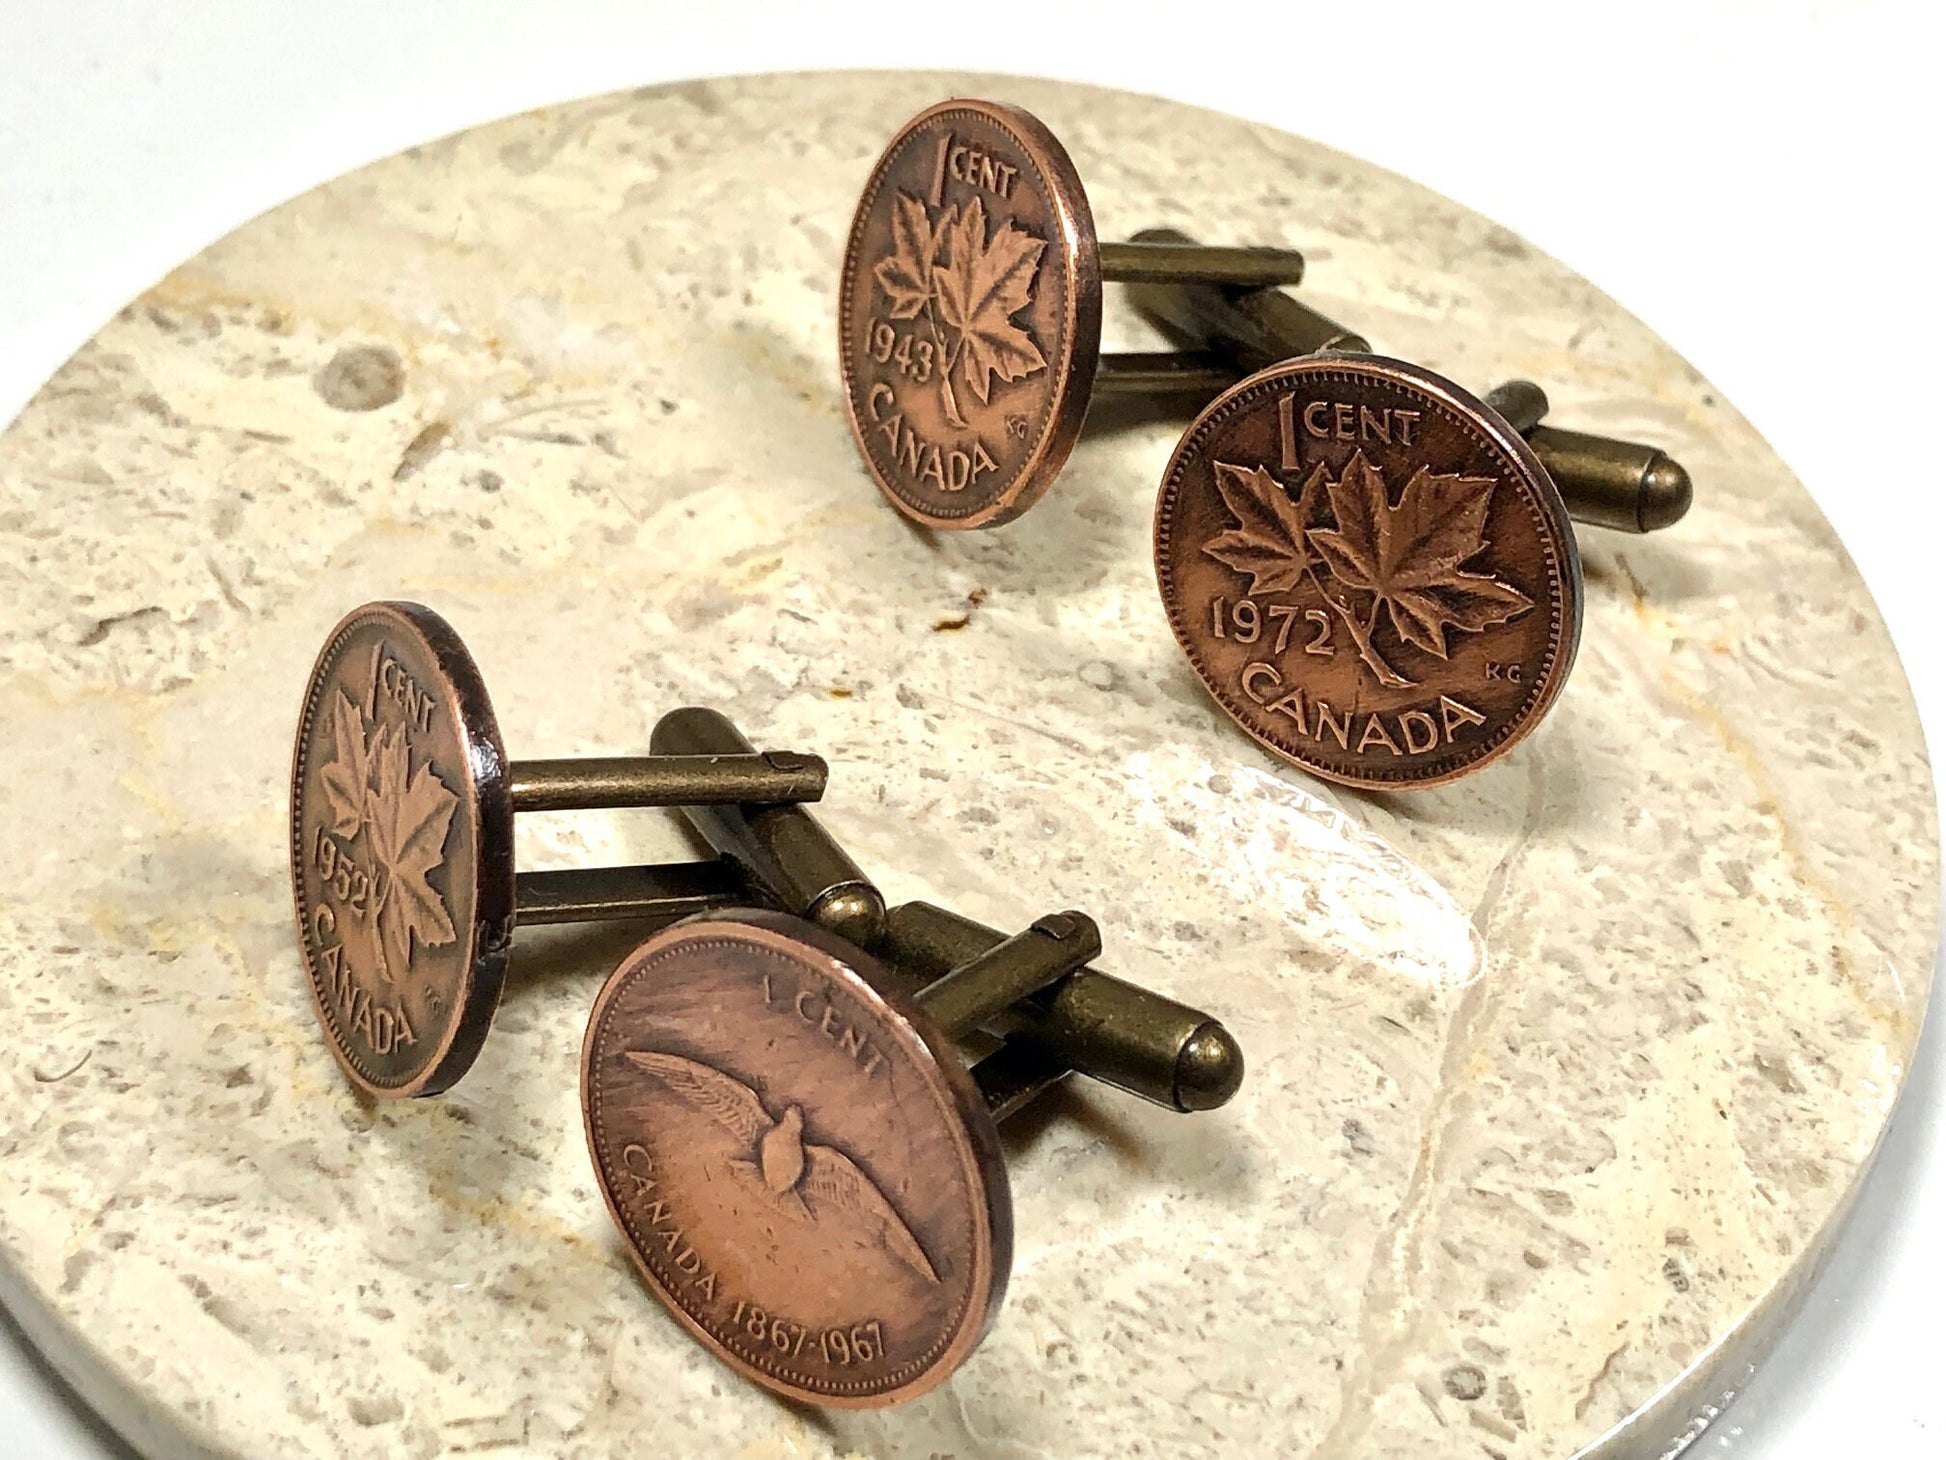 Canada Penny Coin Cuff Links Canada Cent Cufflinks Personal Vintage Handmade Jewelry Gift Friend Charm For Him Her World Coin Collector